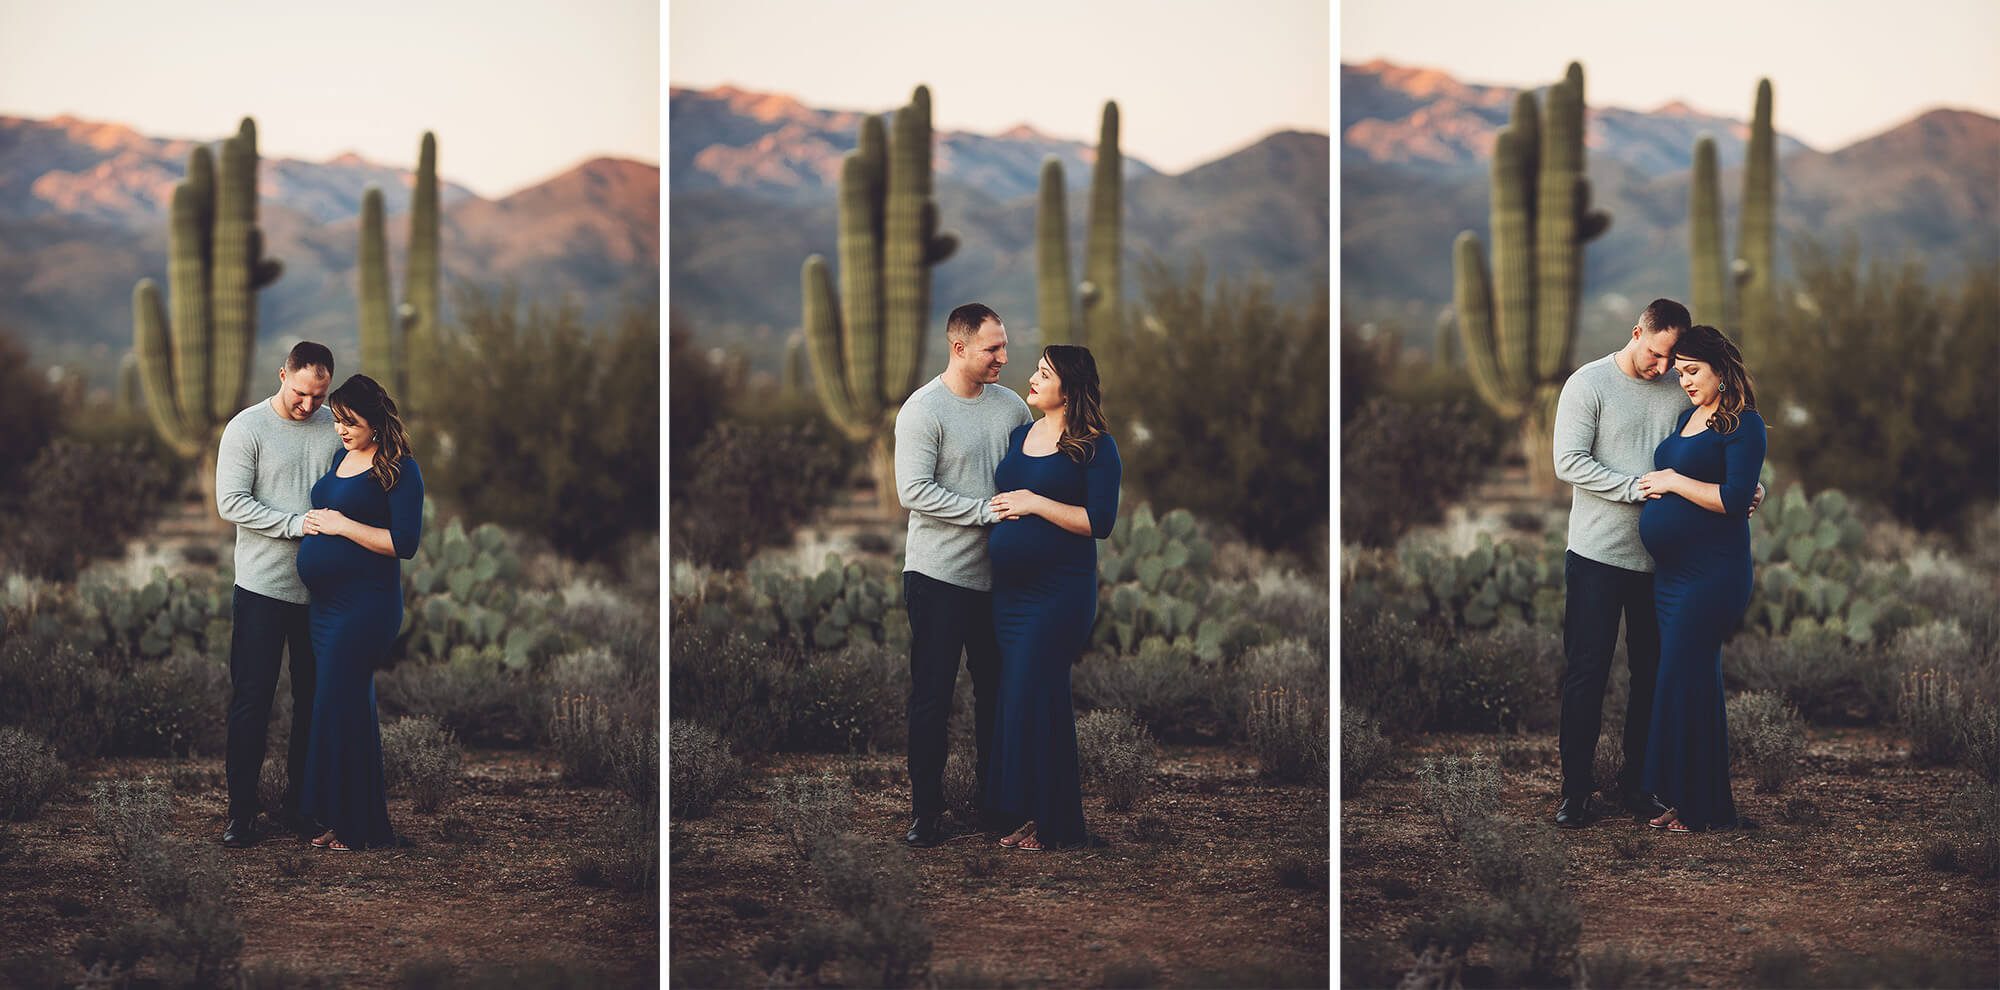 Alicia and her husband with the Catalina mountains in the background.